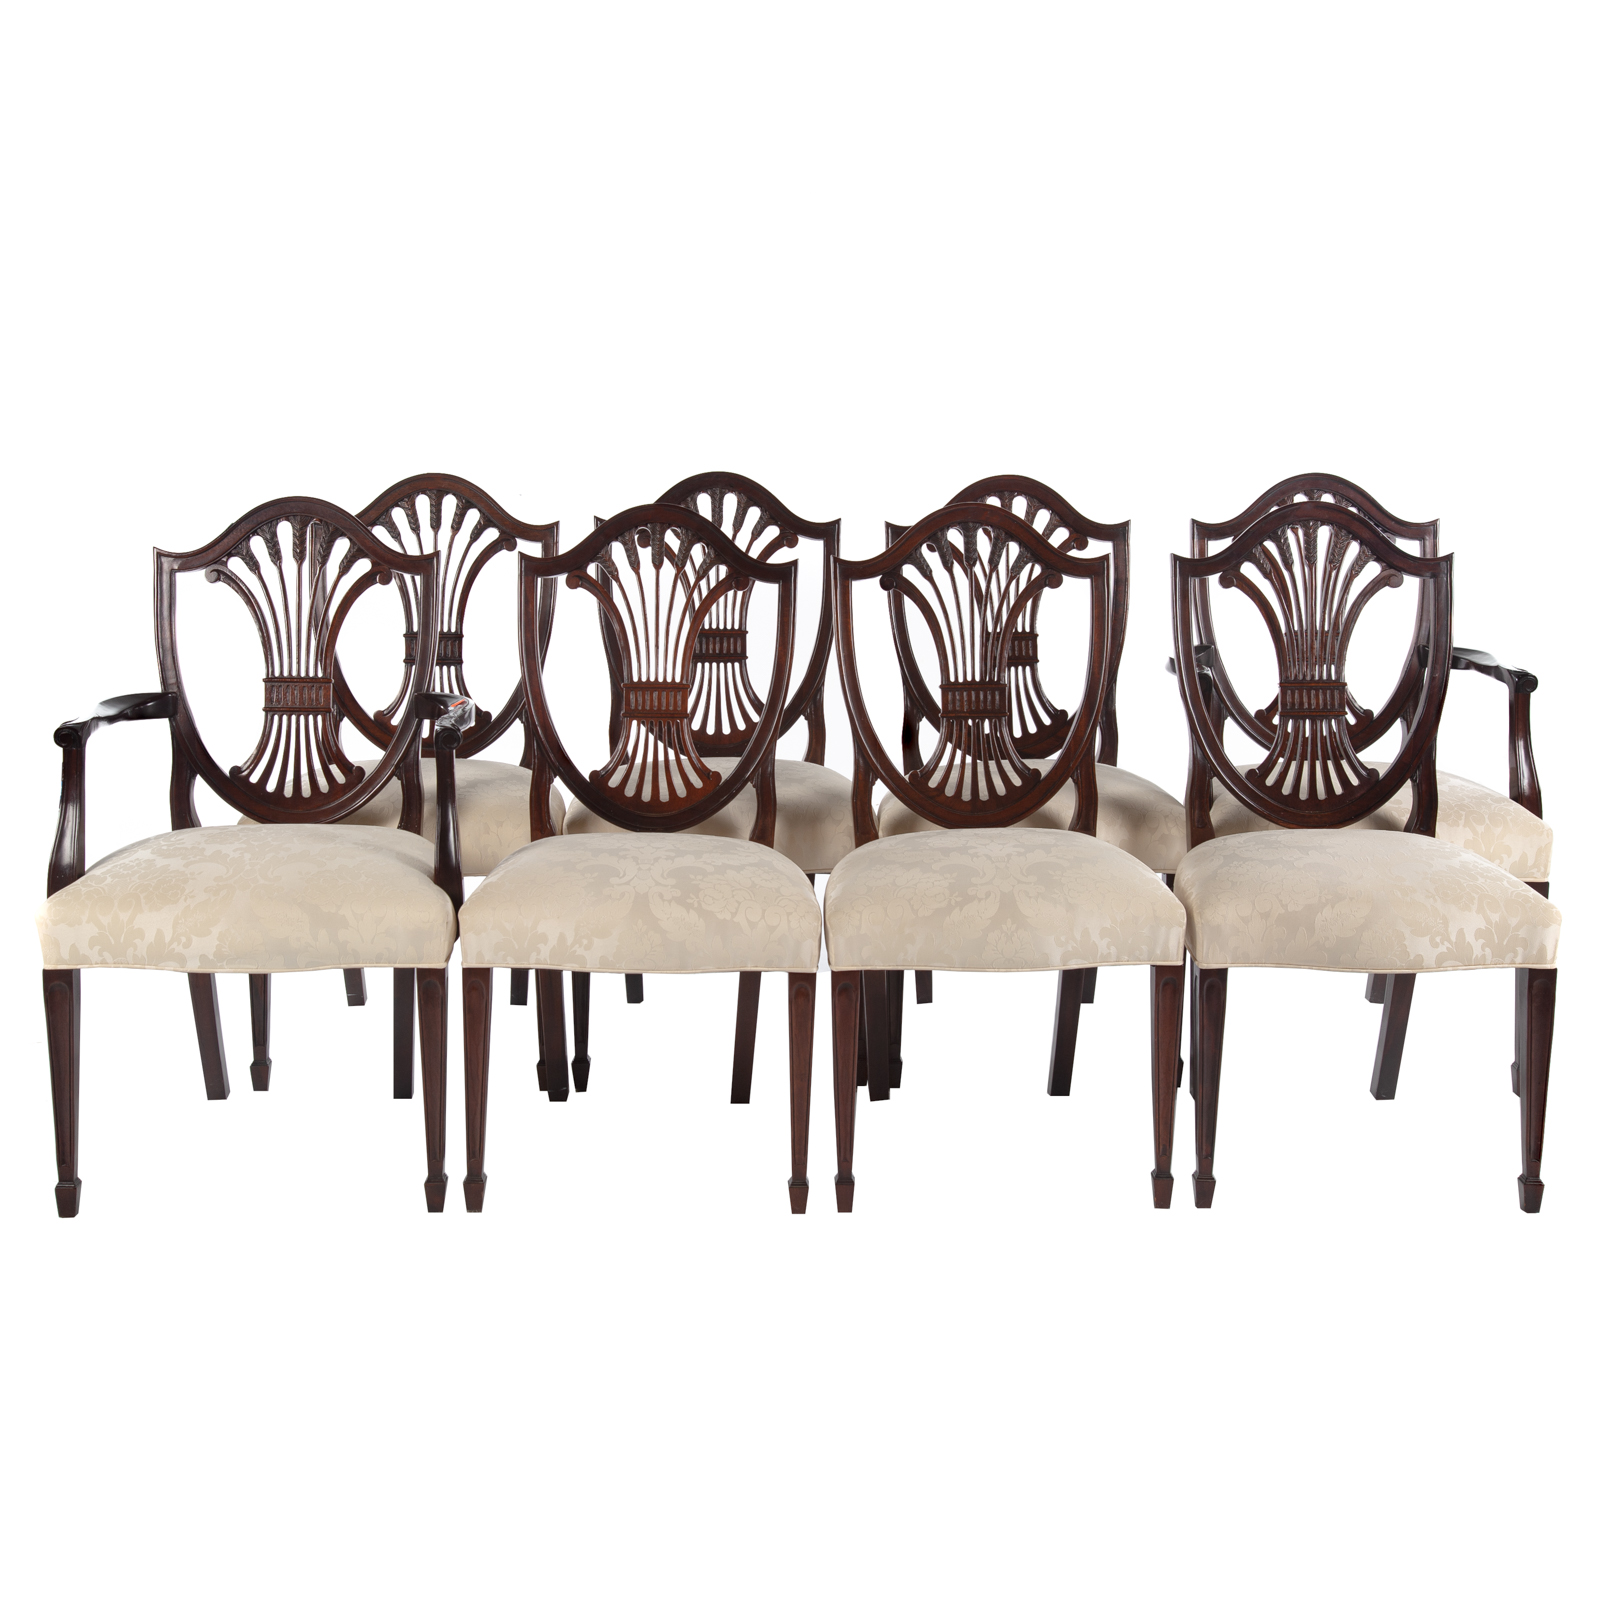 EIGHT STICKLEY FEDERAL STYLE DINING